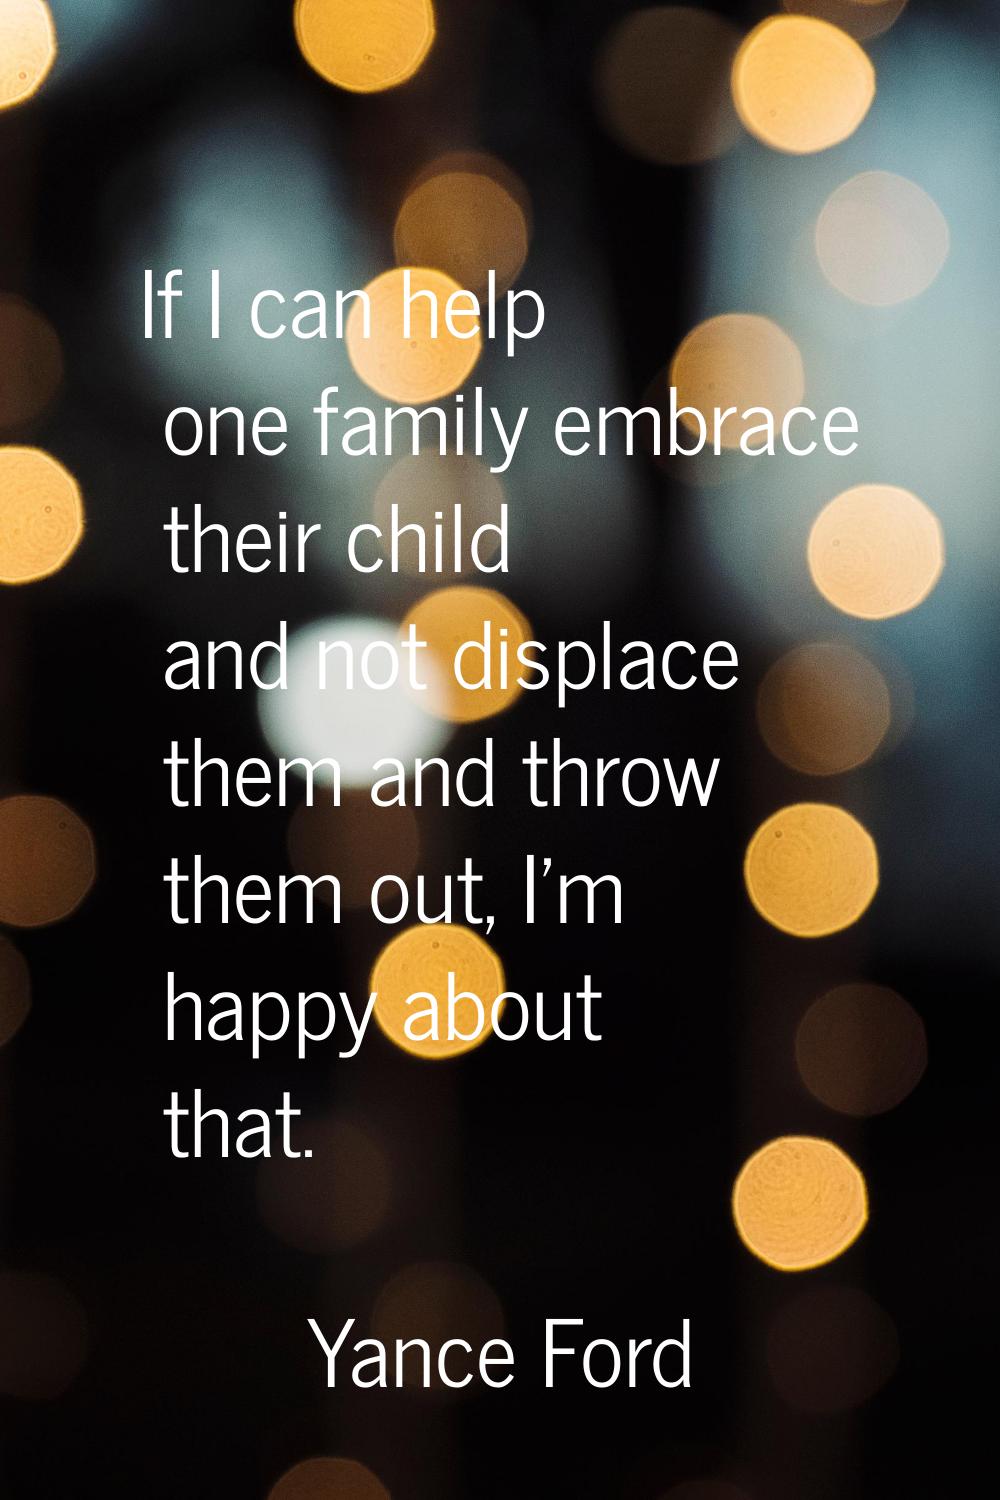 If I can help one family embrace their child and not displace them and throw them out, I'm happy ab